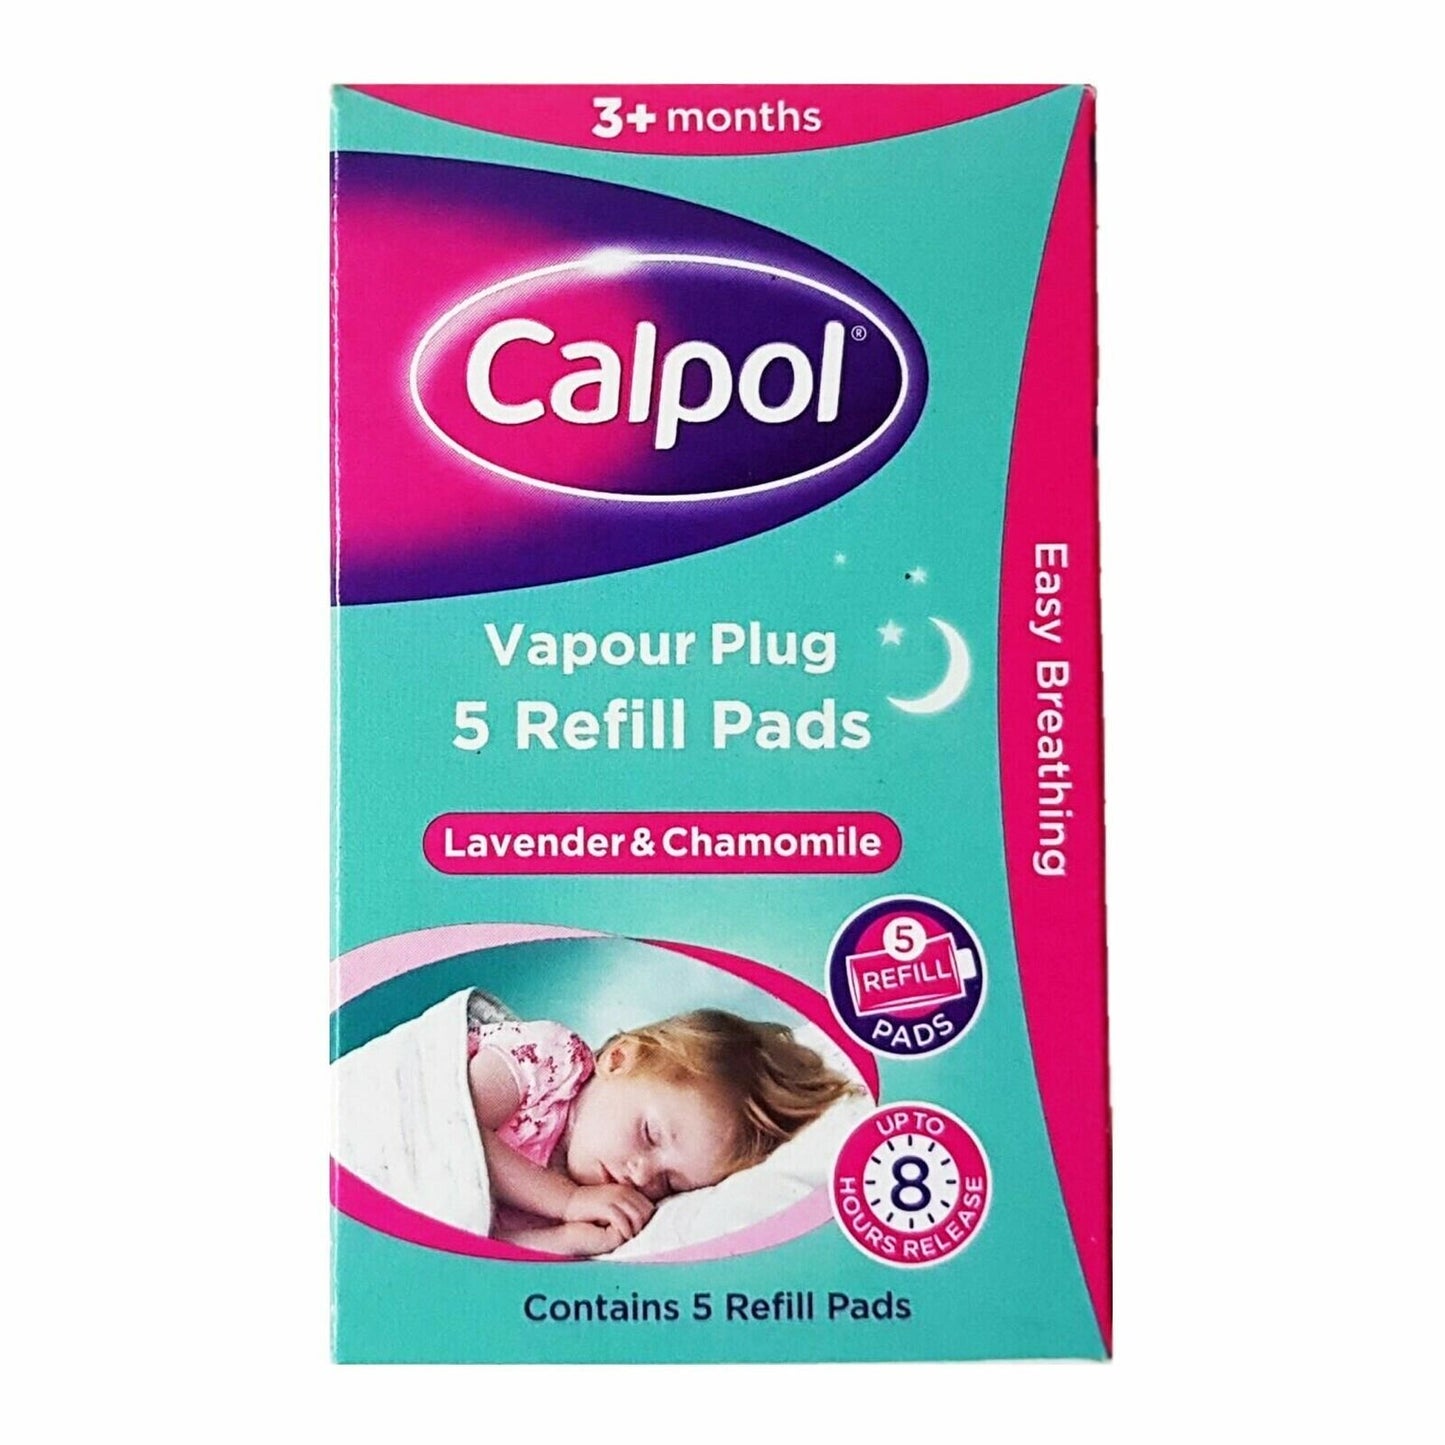 Calpol Vapour Plug In Lavender and Chamomile Refill - 5 Pads